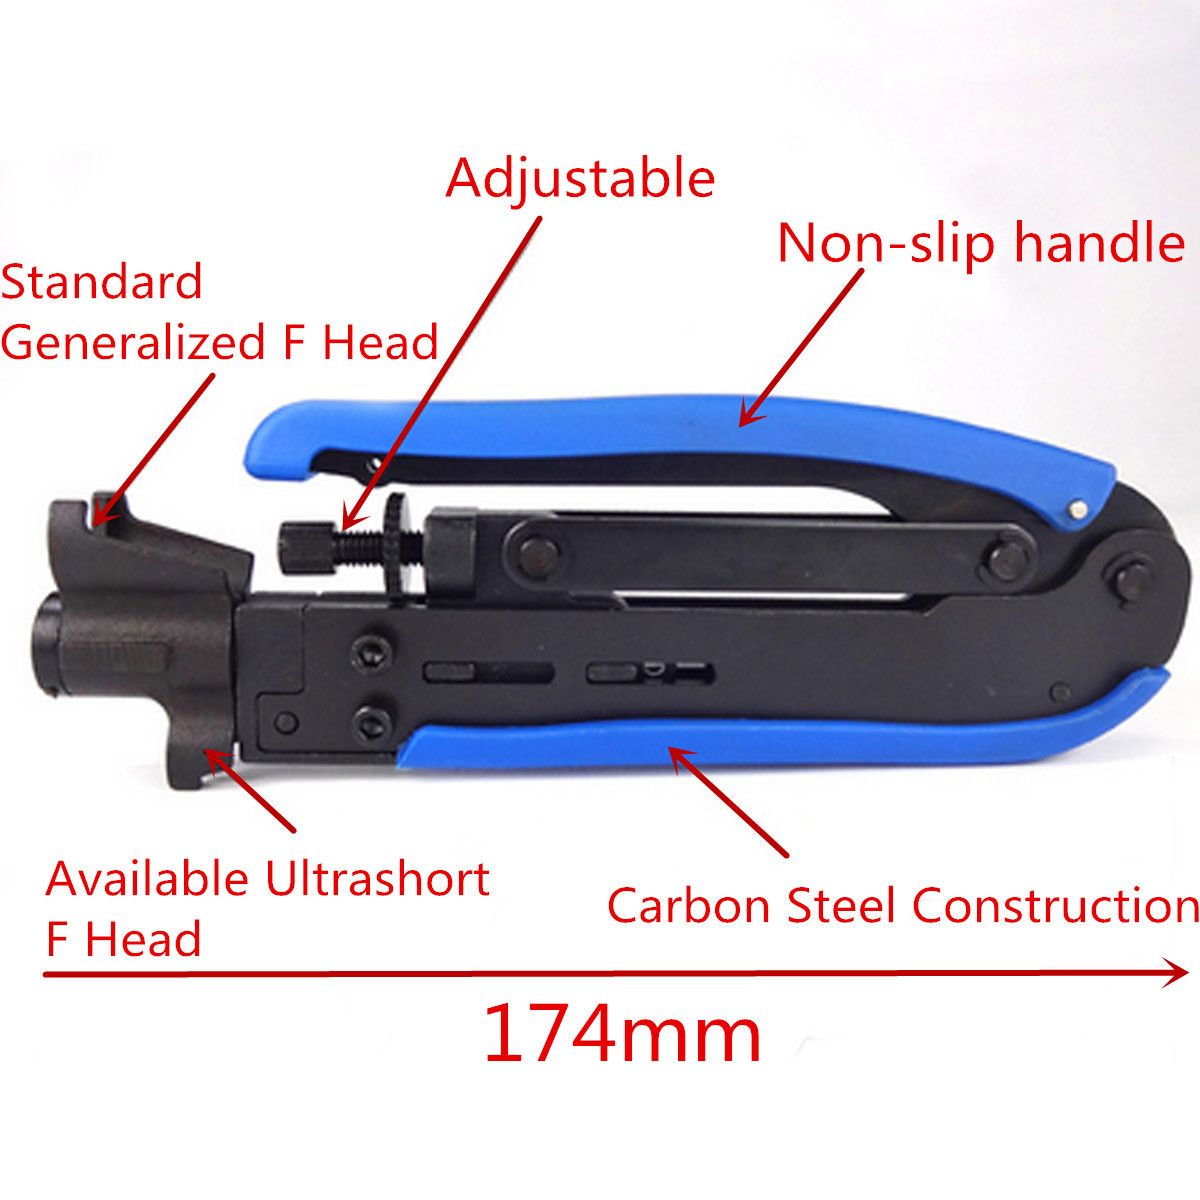 2Pcs-Coax-Coaxial-Cable-Crimper-amp-Stripper-Multi-Function-Hand-Operated-Tools-1095672